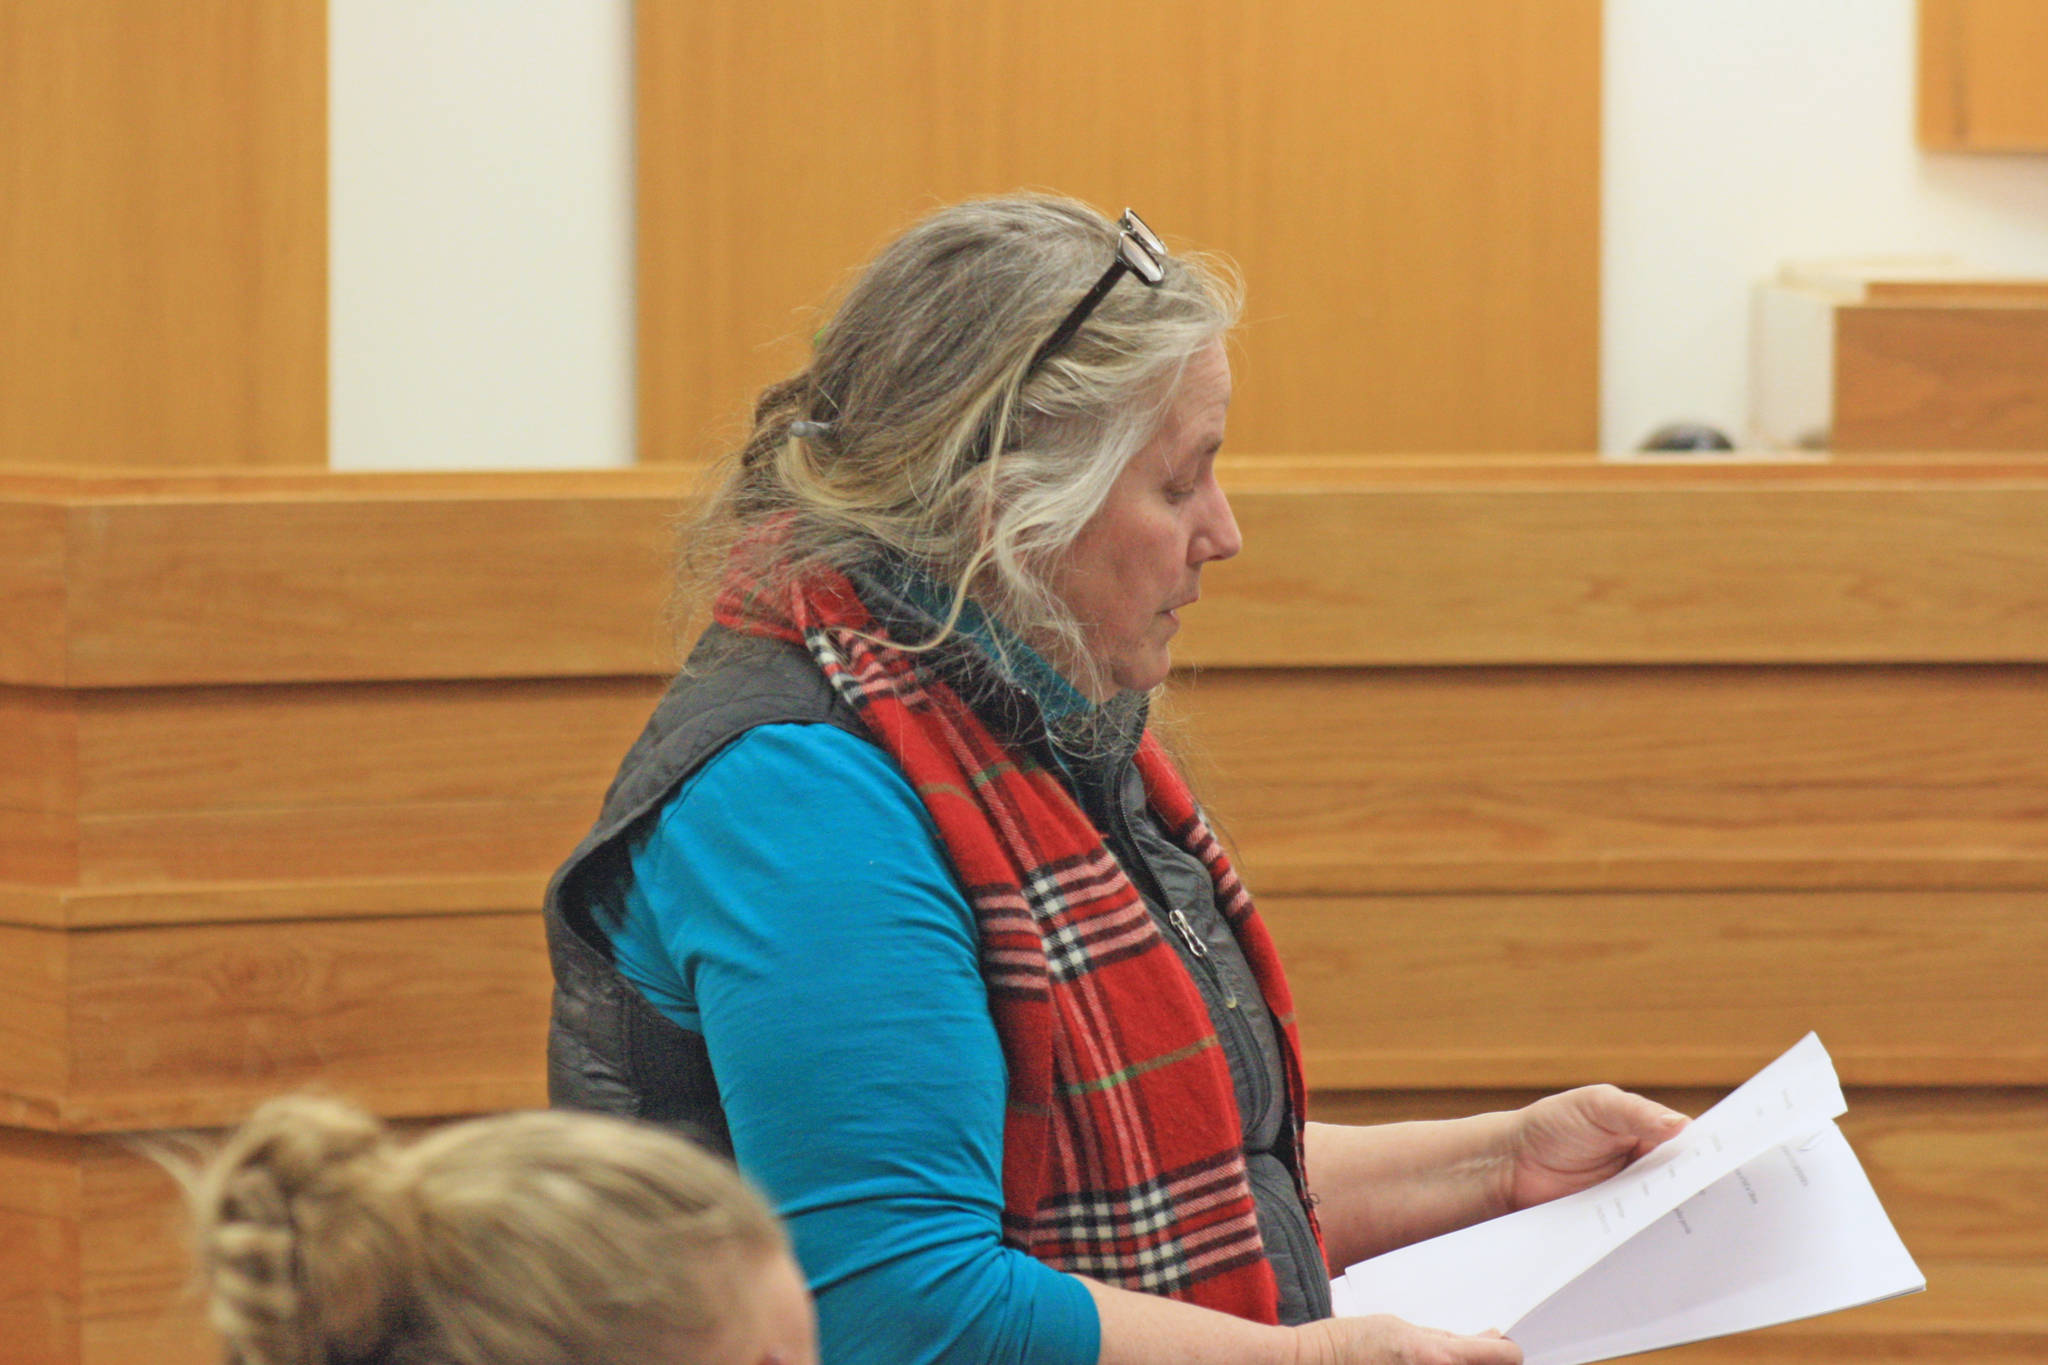 Kenai Peninsula Youth Court Director Ginny Espenshade discusses legal principles with students at the Old Kenai Courthouse on Jan. 30. A diversion program for youth offenders, the youth court allows youth facing certain misdemeanor charges to have their cases heard before peers. (Photo by Erin Thompson/Peninsula Clarion)